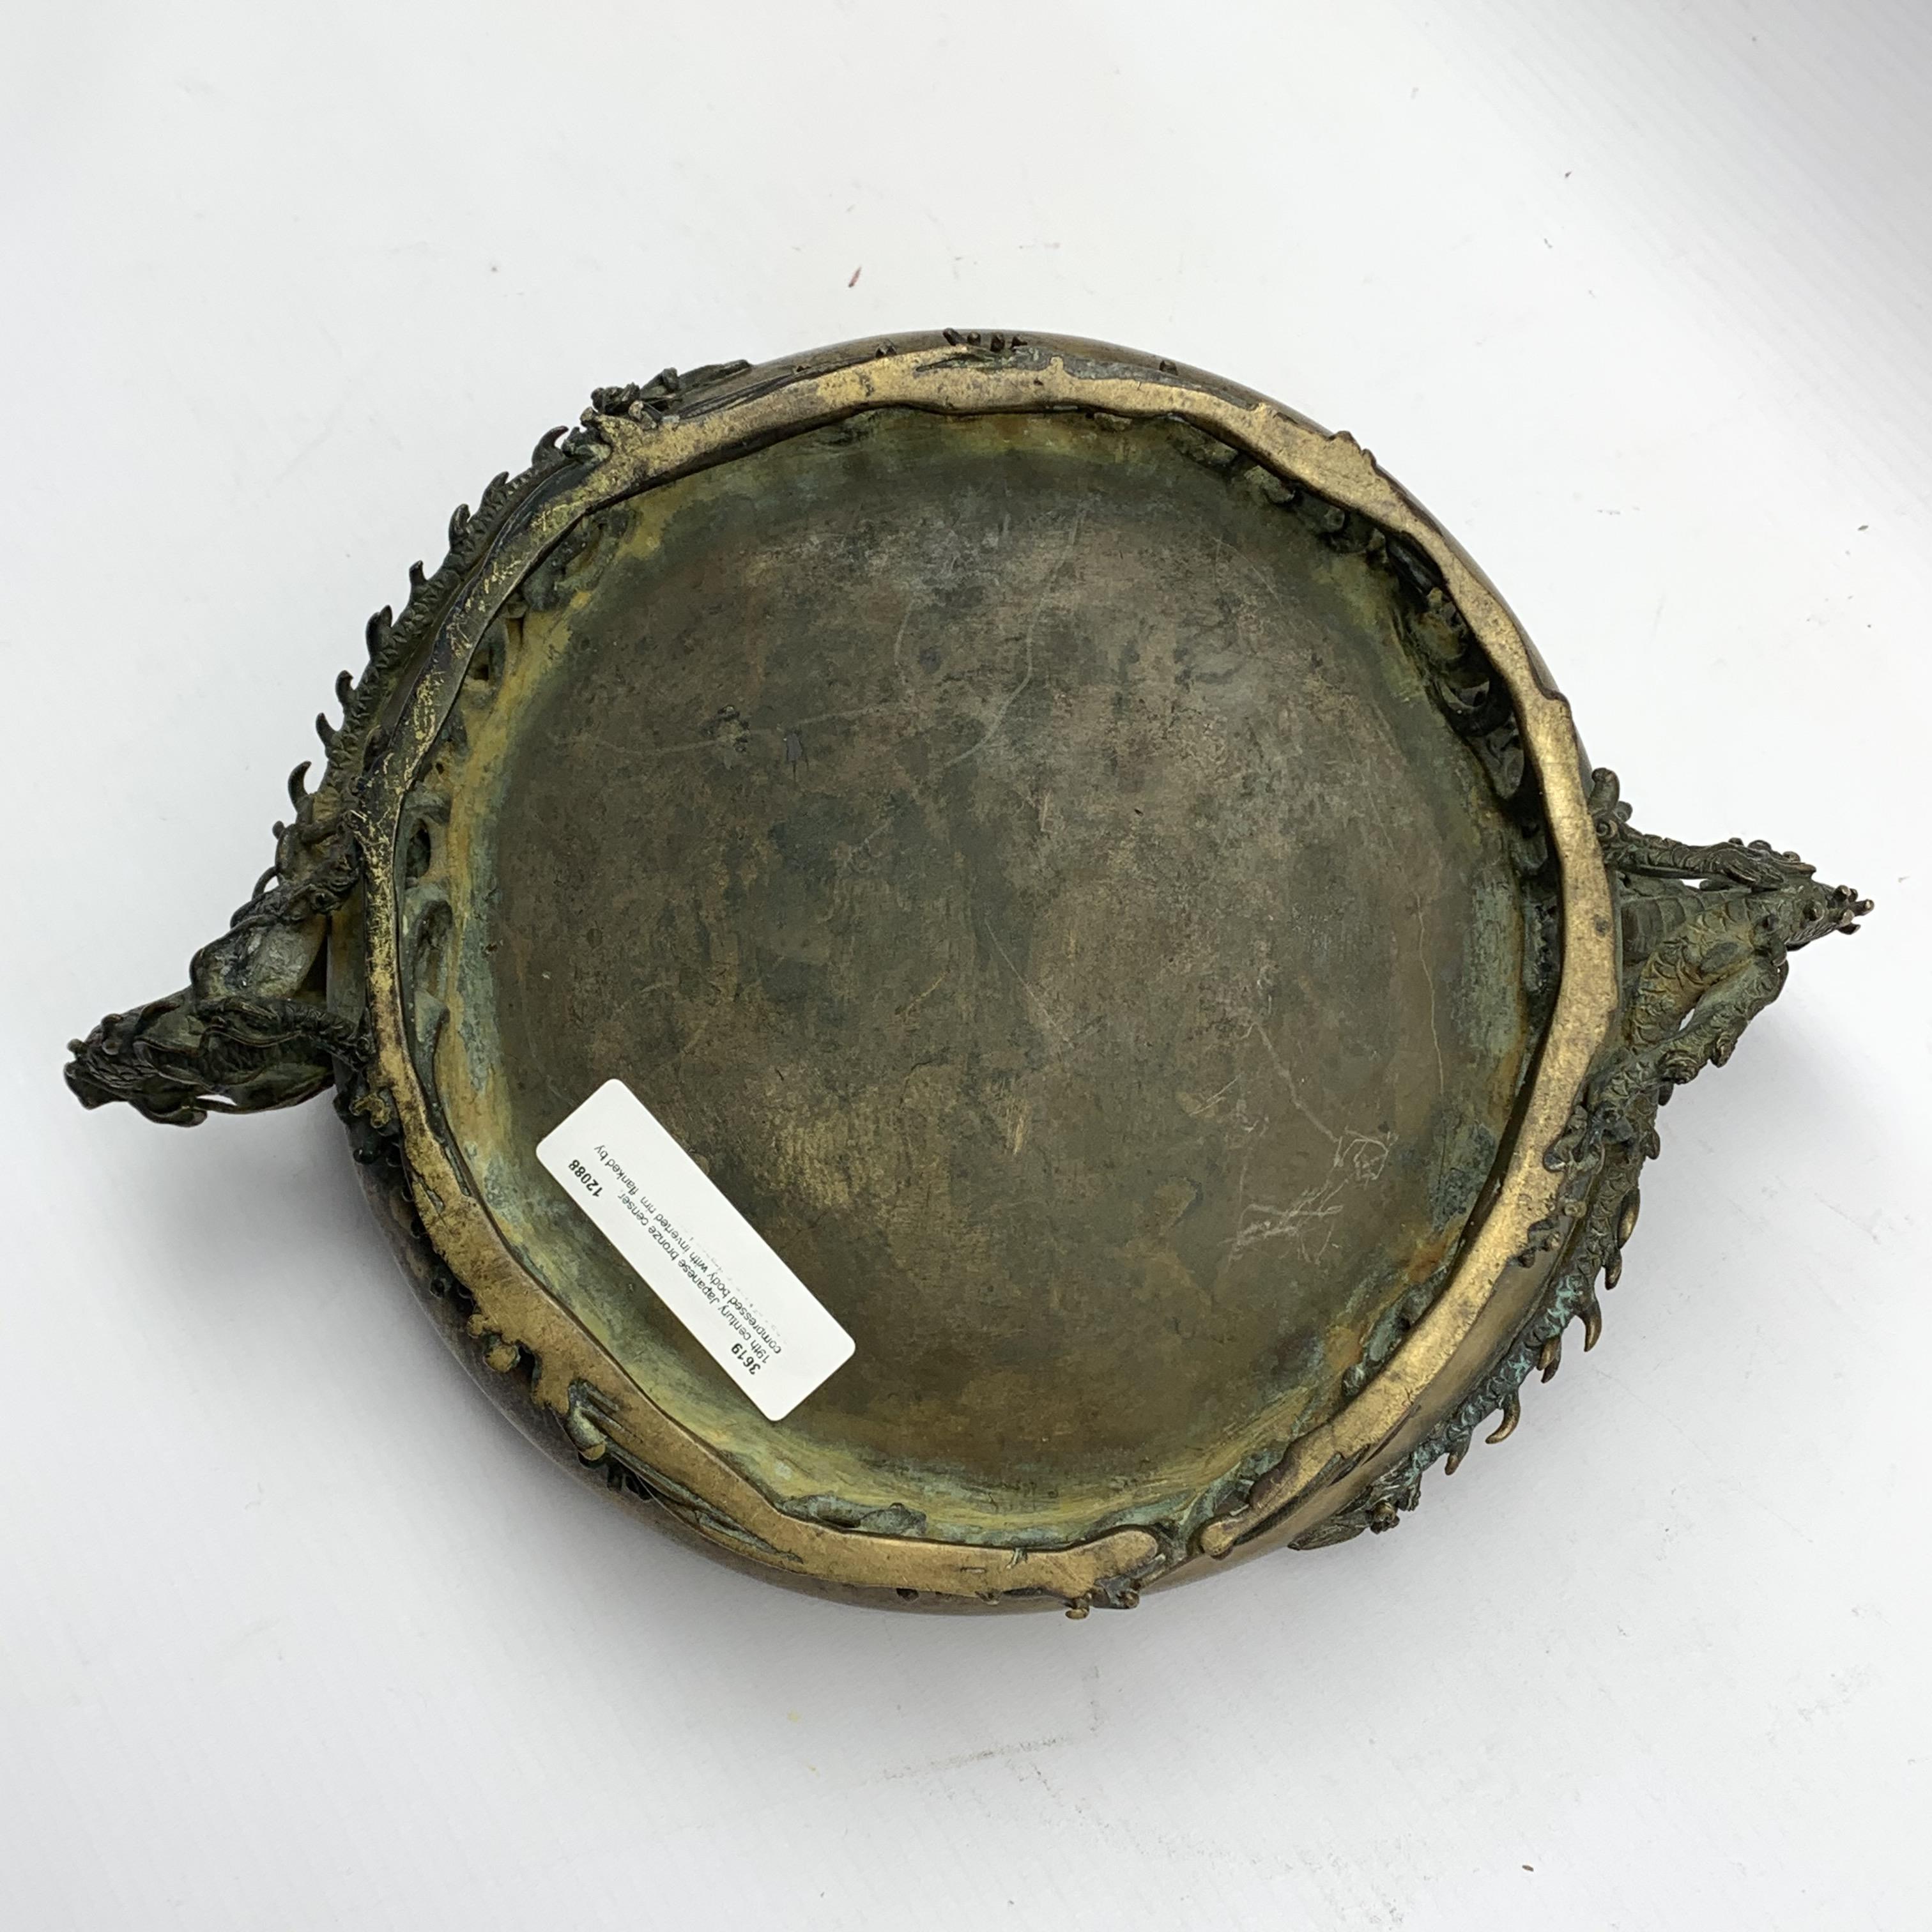 19th century Japanese bronze censer, compressed body with inverted rim flanked by a pair of bronze - Image 5 of 5